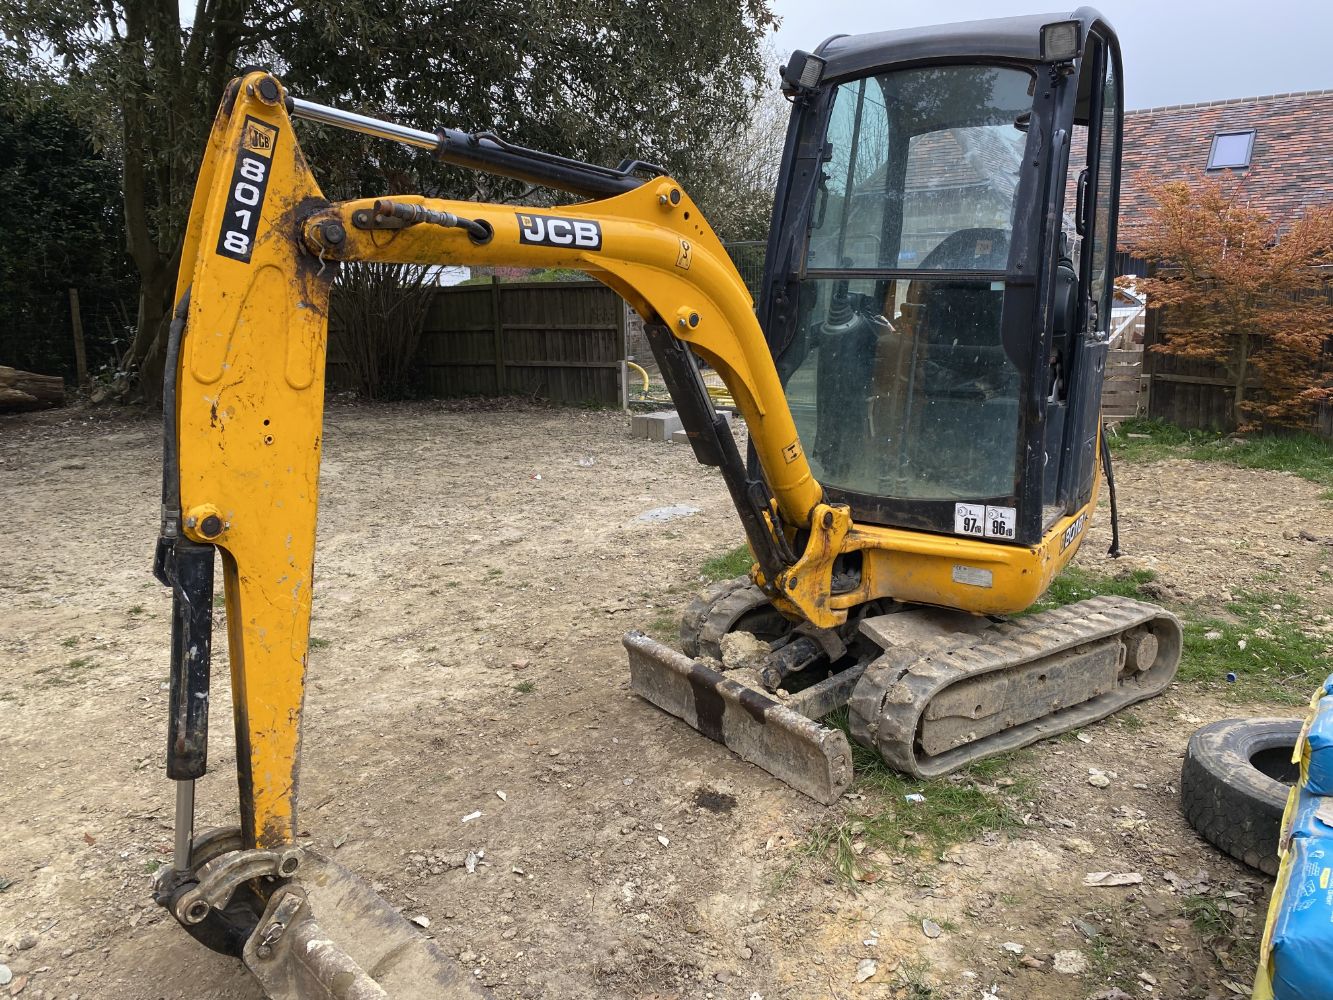 JCB 8018 CTS Mini Excavator (2011), Ford Transit LWB Commercial Van and Power Tools and Equipment